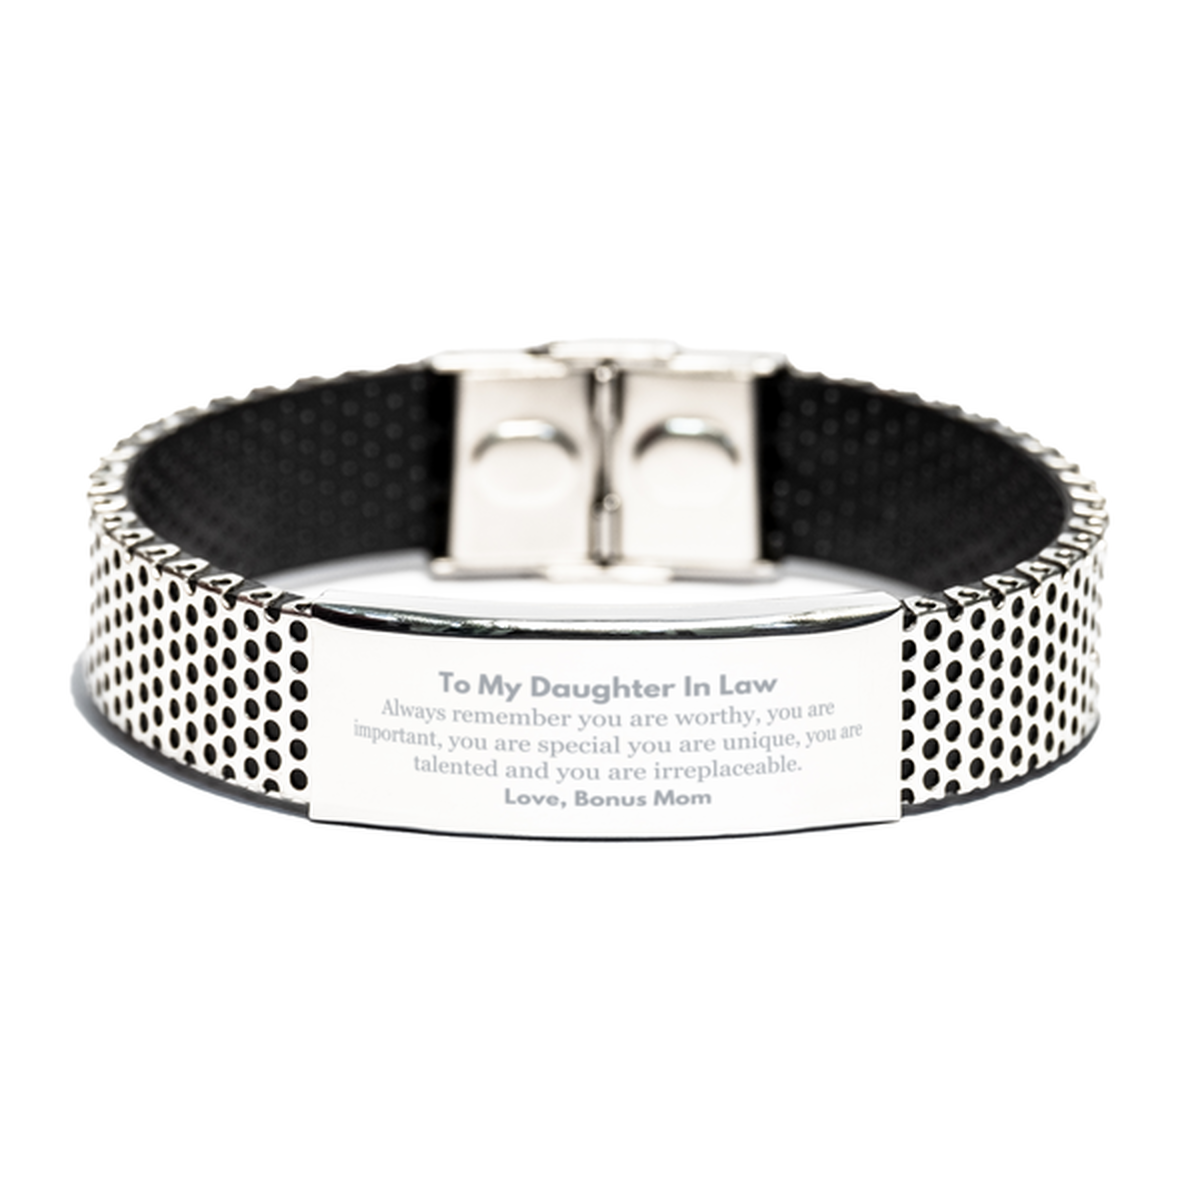 Daughter In Law Birthday Gifts from Bonus Mom, Inspirational Stainless Steel Bracelet for Daughter In Law Christmas Graduation Gifts for Daughter In Law Always remember you are worthy, you are important. Love, Bonus Mom